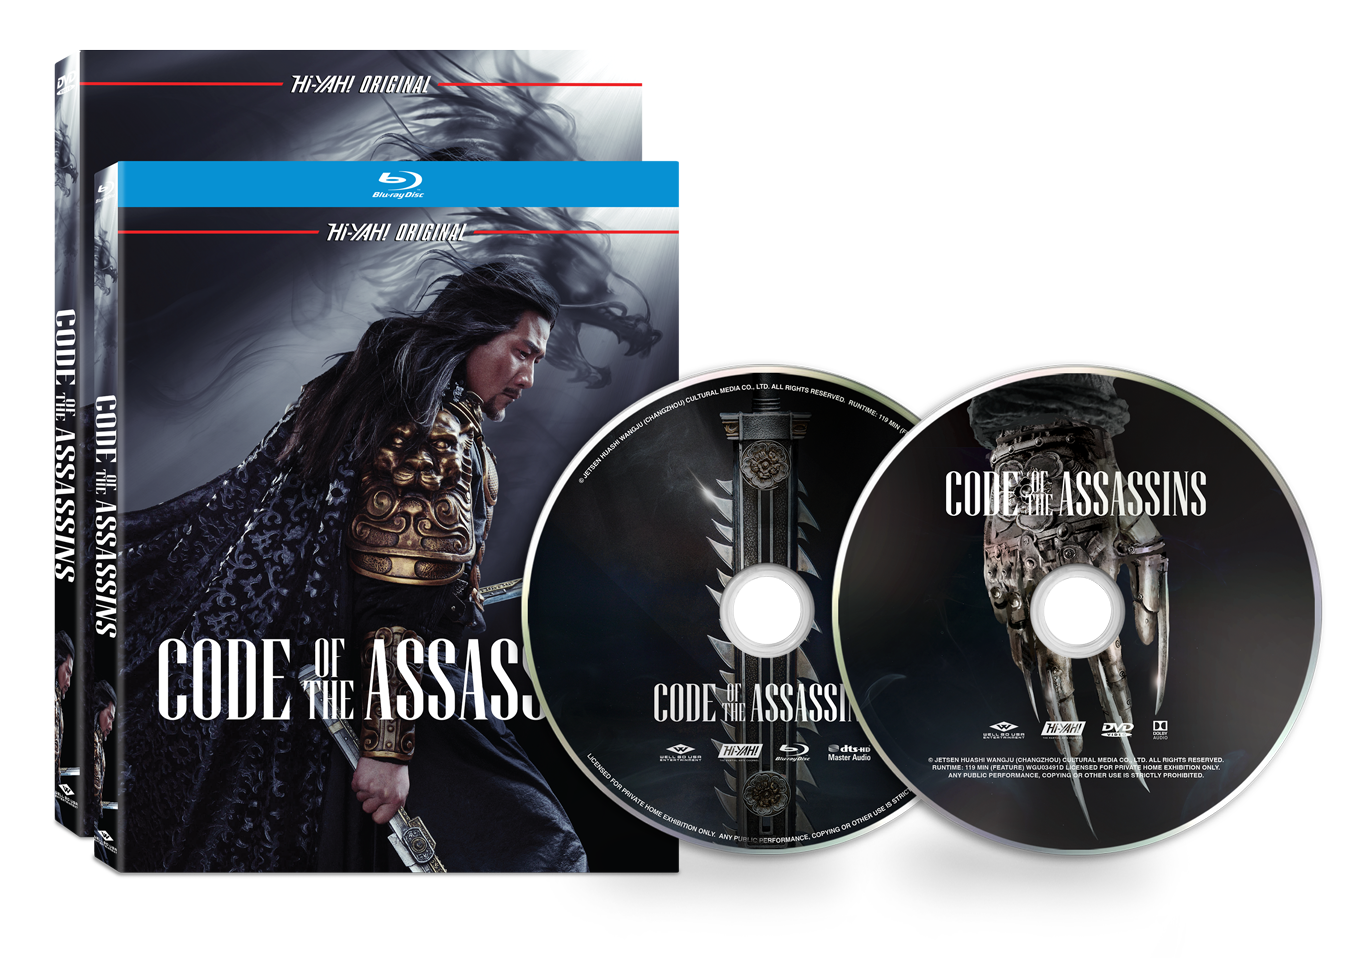 CODE OF THE ASSASSINS Debuts Exclusively on Streaming Service HiYAH